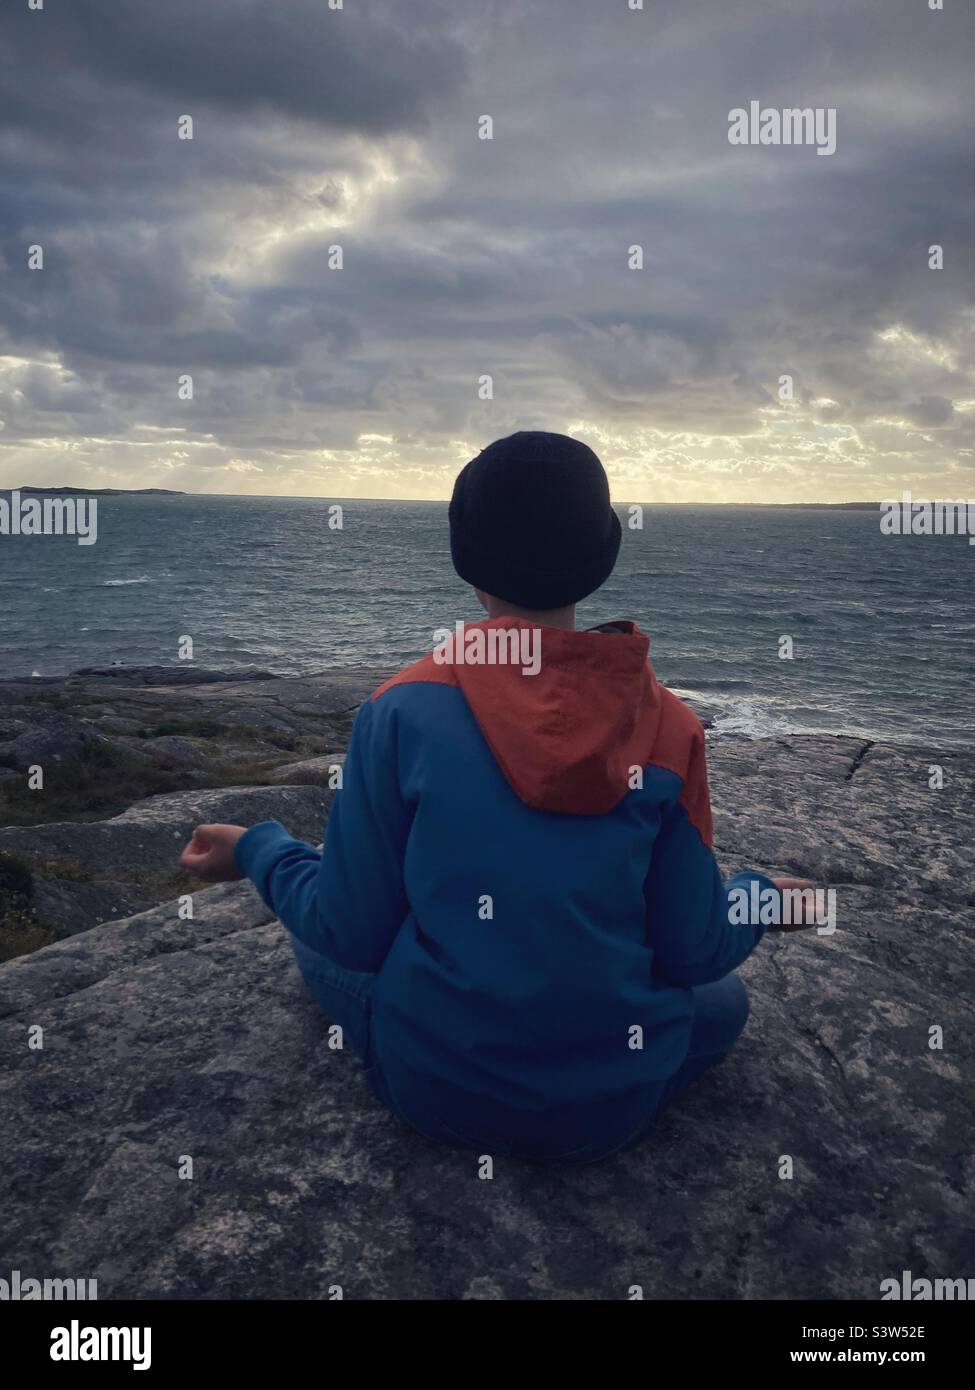 A boy at the age of eleven or twelve Watching the baltic sea on the Swedish West Coast during a storm in a yoga pose Stock Photo